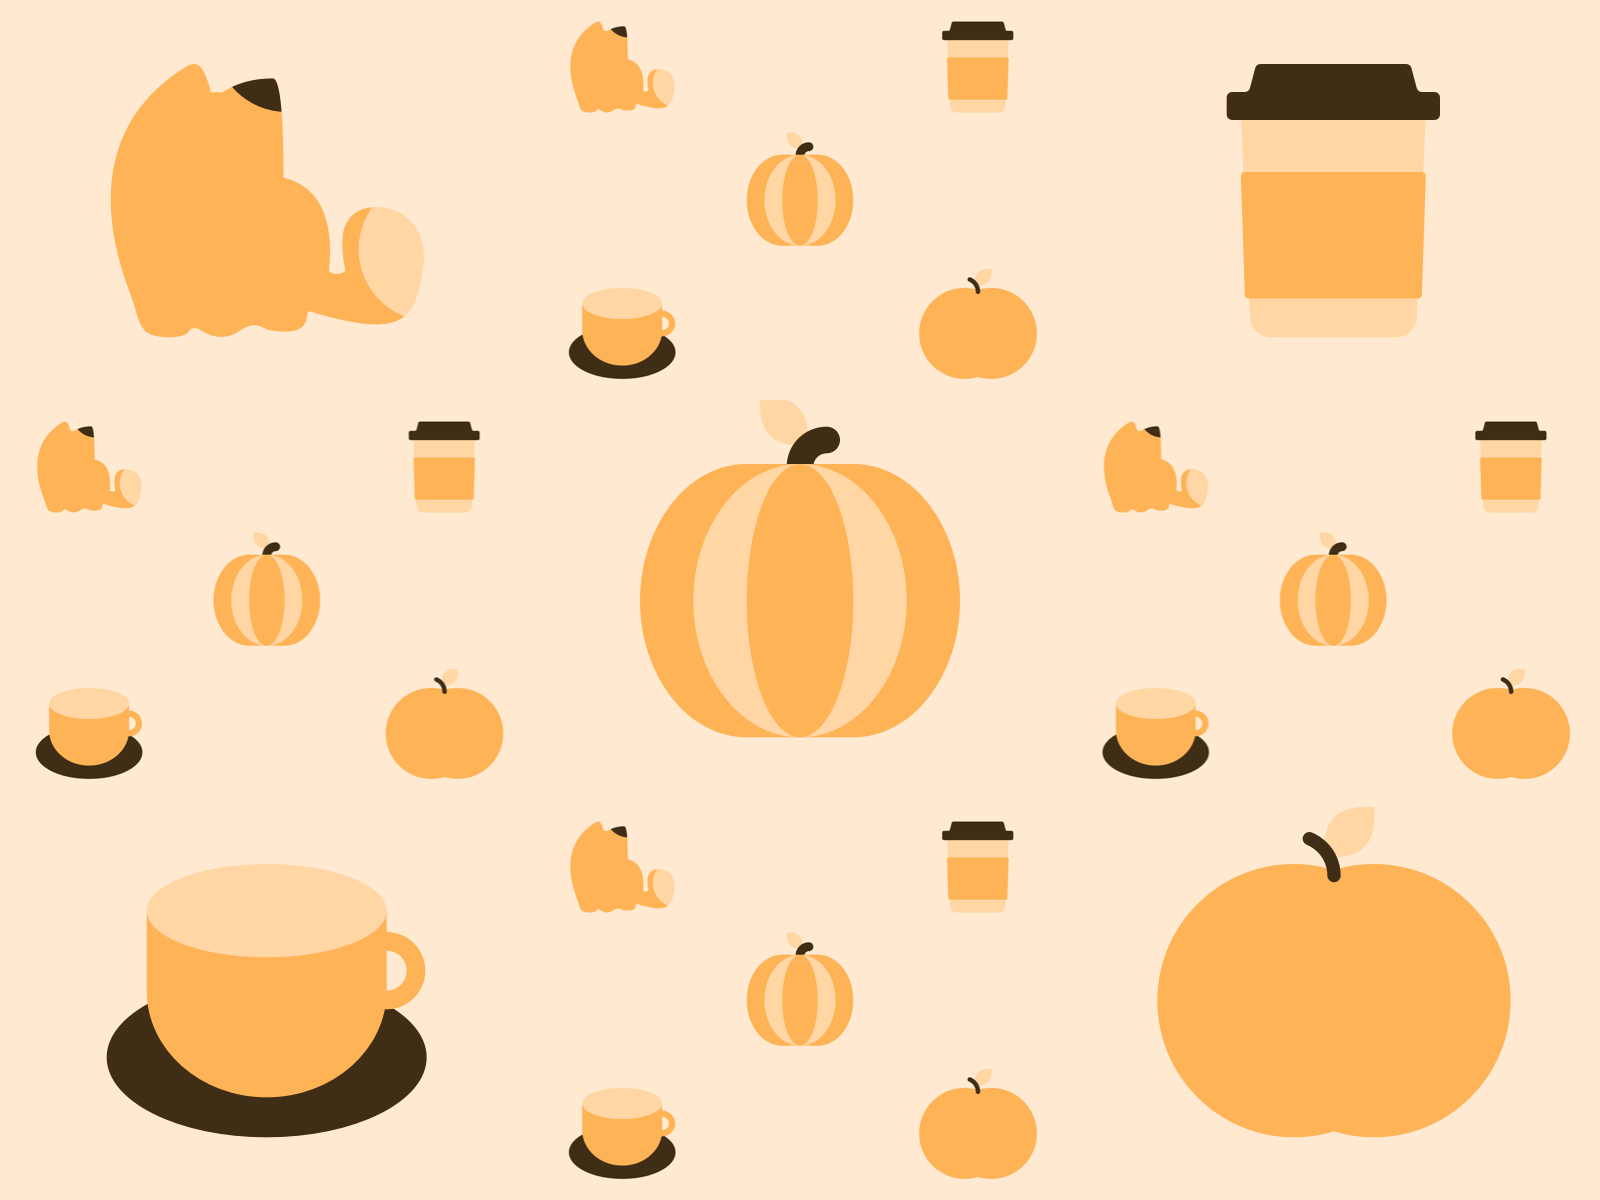 Cozy Fall Wallpaper For Your Phone Like Cats Very Much